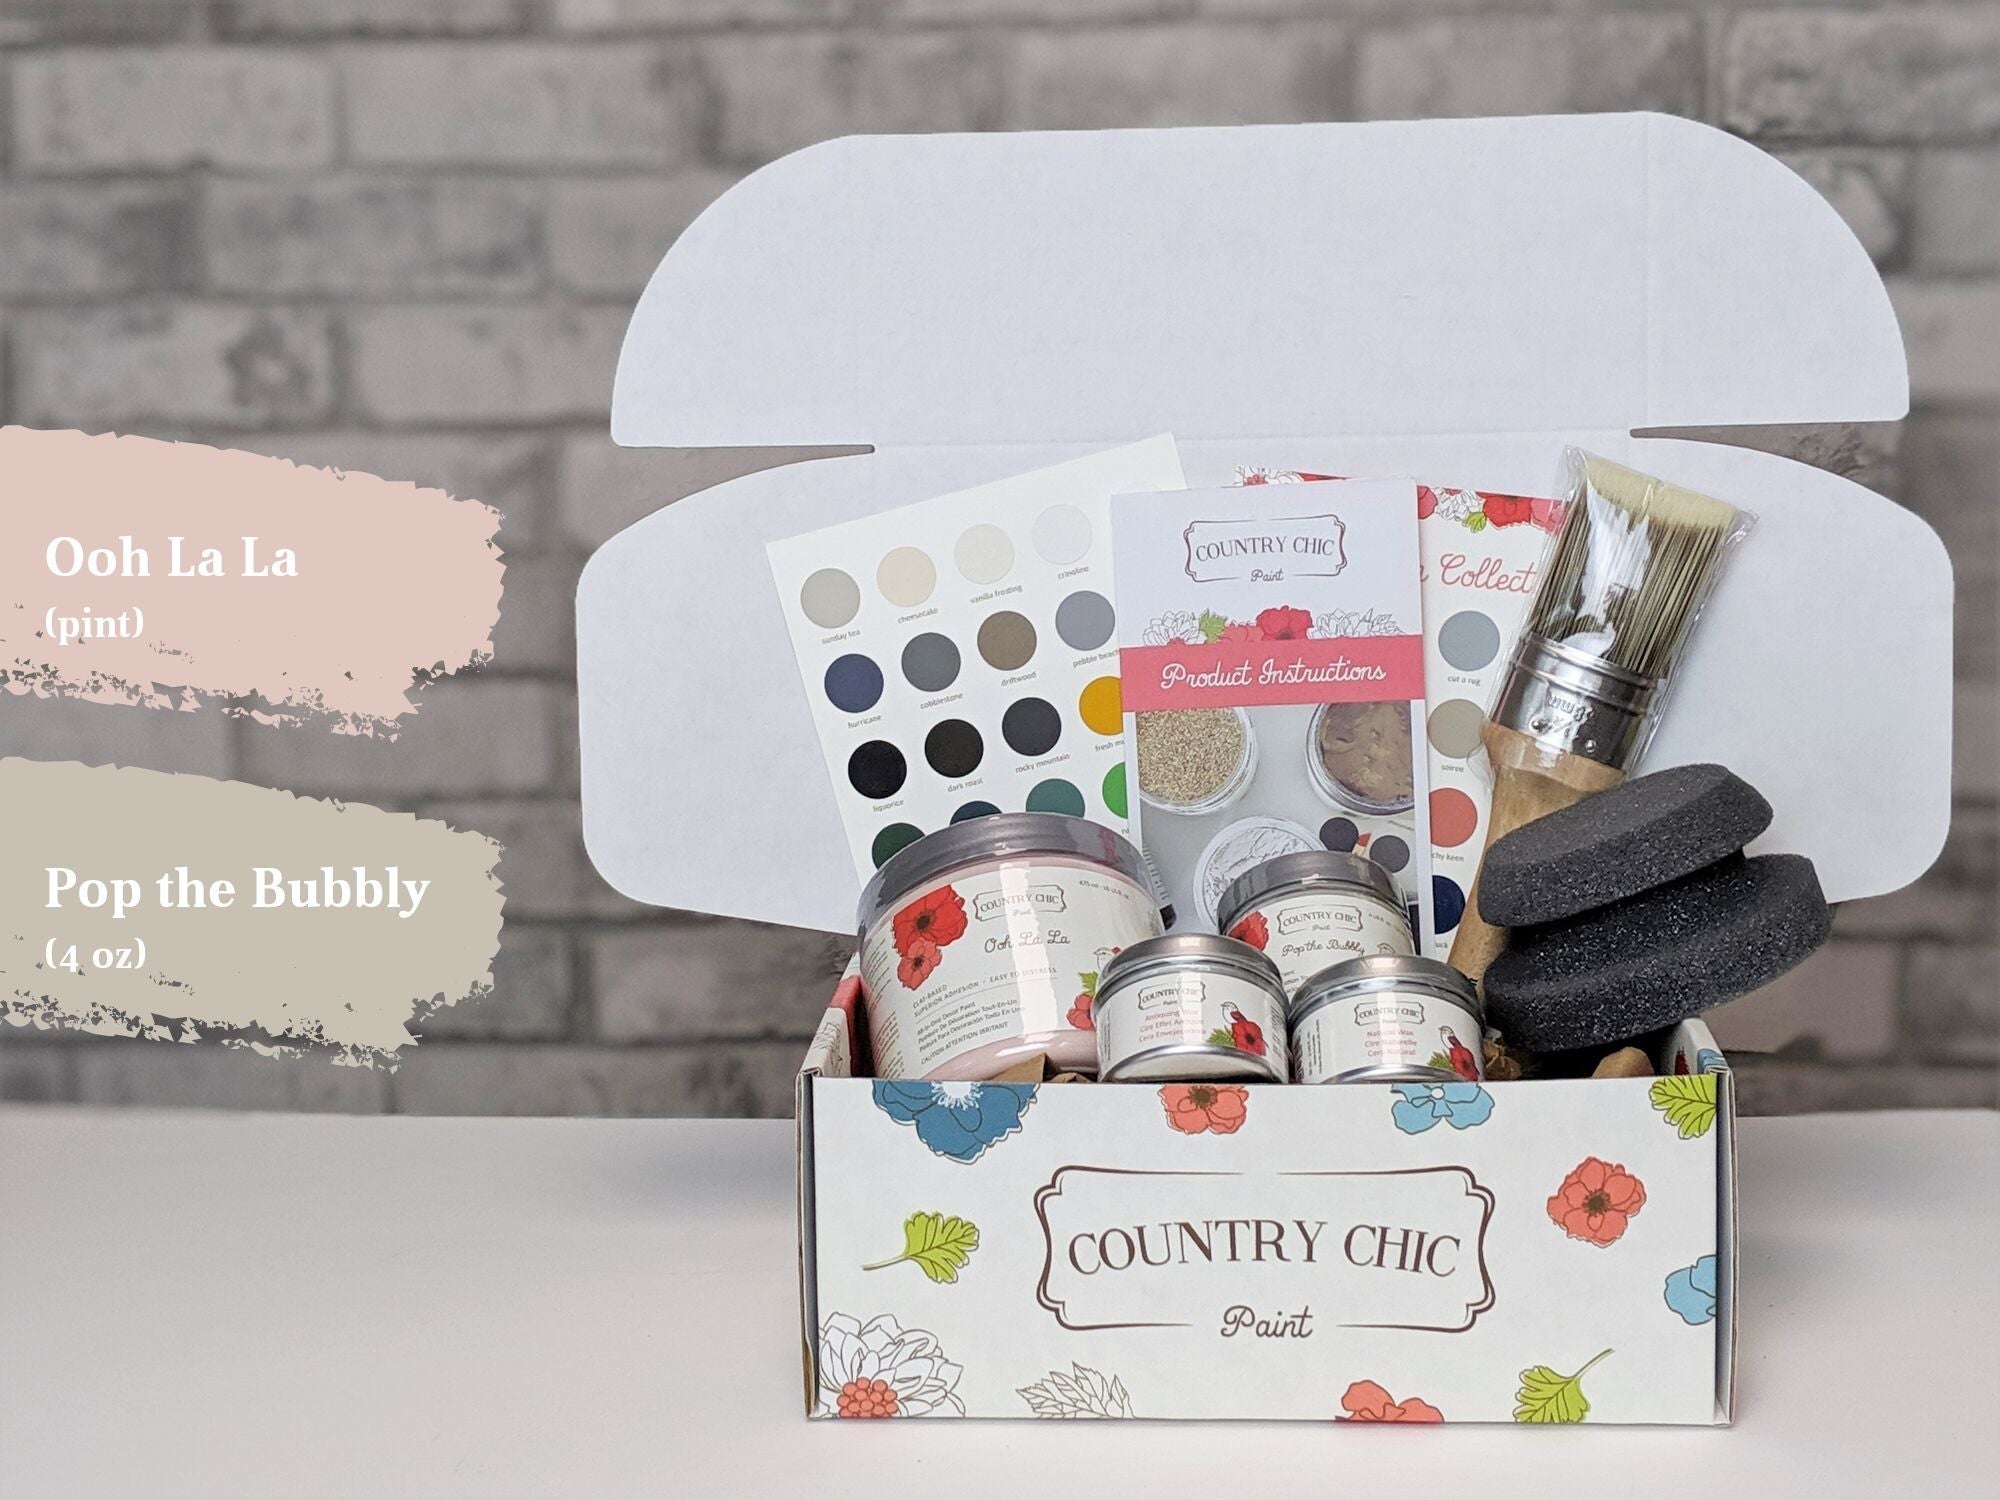 Large Starter Kit - Country Chic Paint – SOMETHING FROM SOMEWHERE